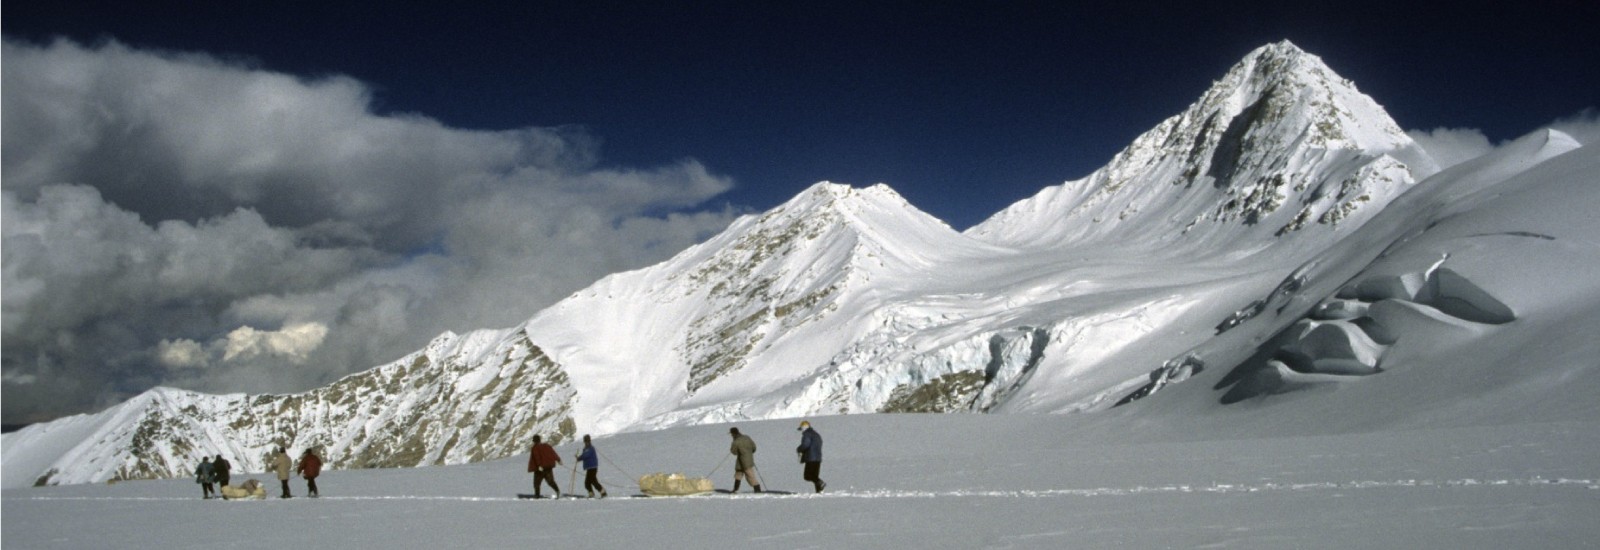 High altitude porters descending equipment and ice cores from the Dasuopu ice core drilling site.